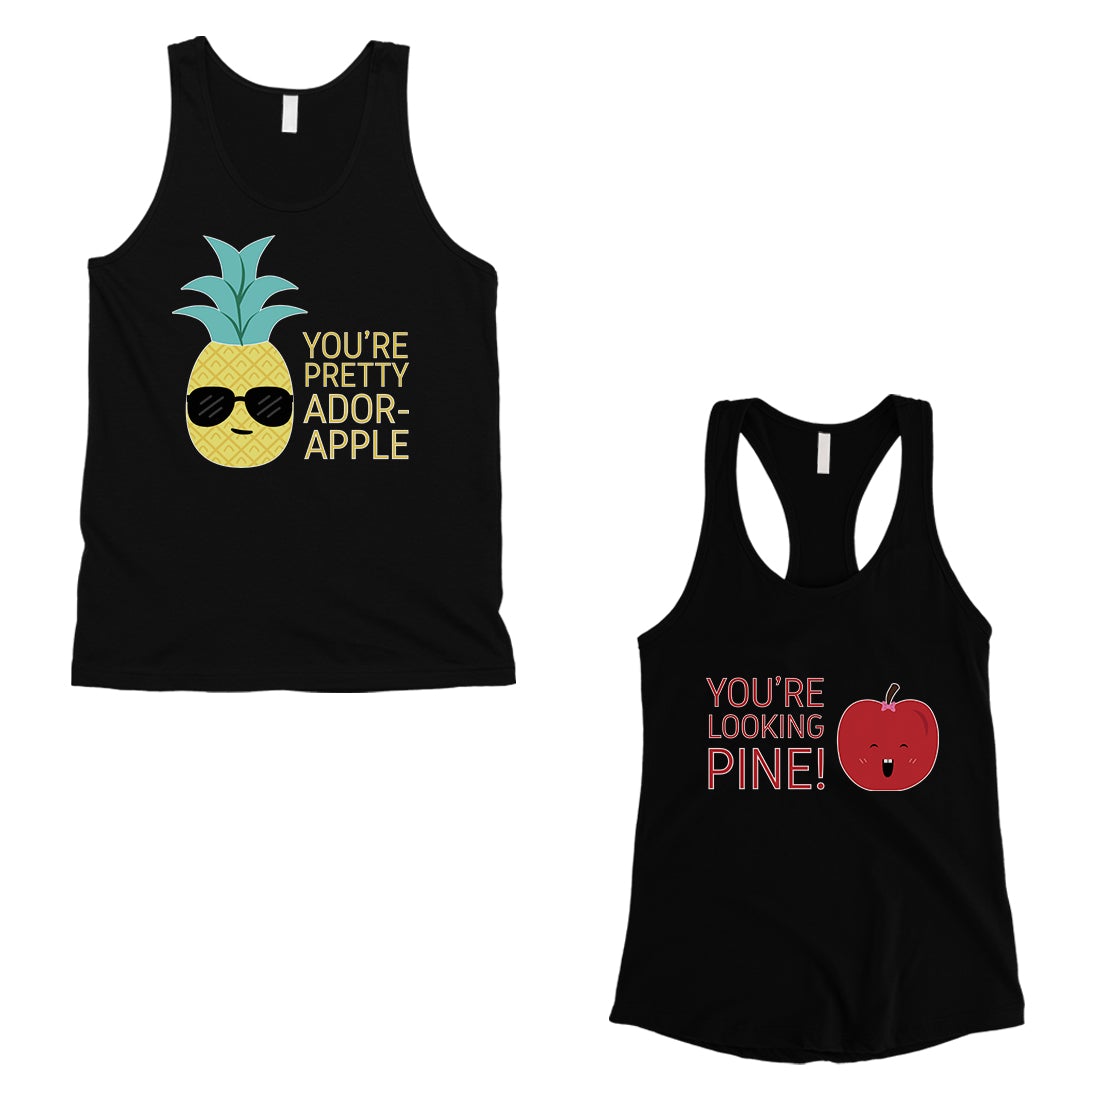 Pineapple Apple Matching Couple Tank Tops Unique Newlywed Gifts Black